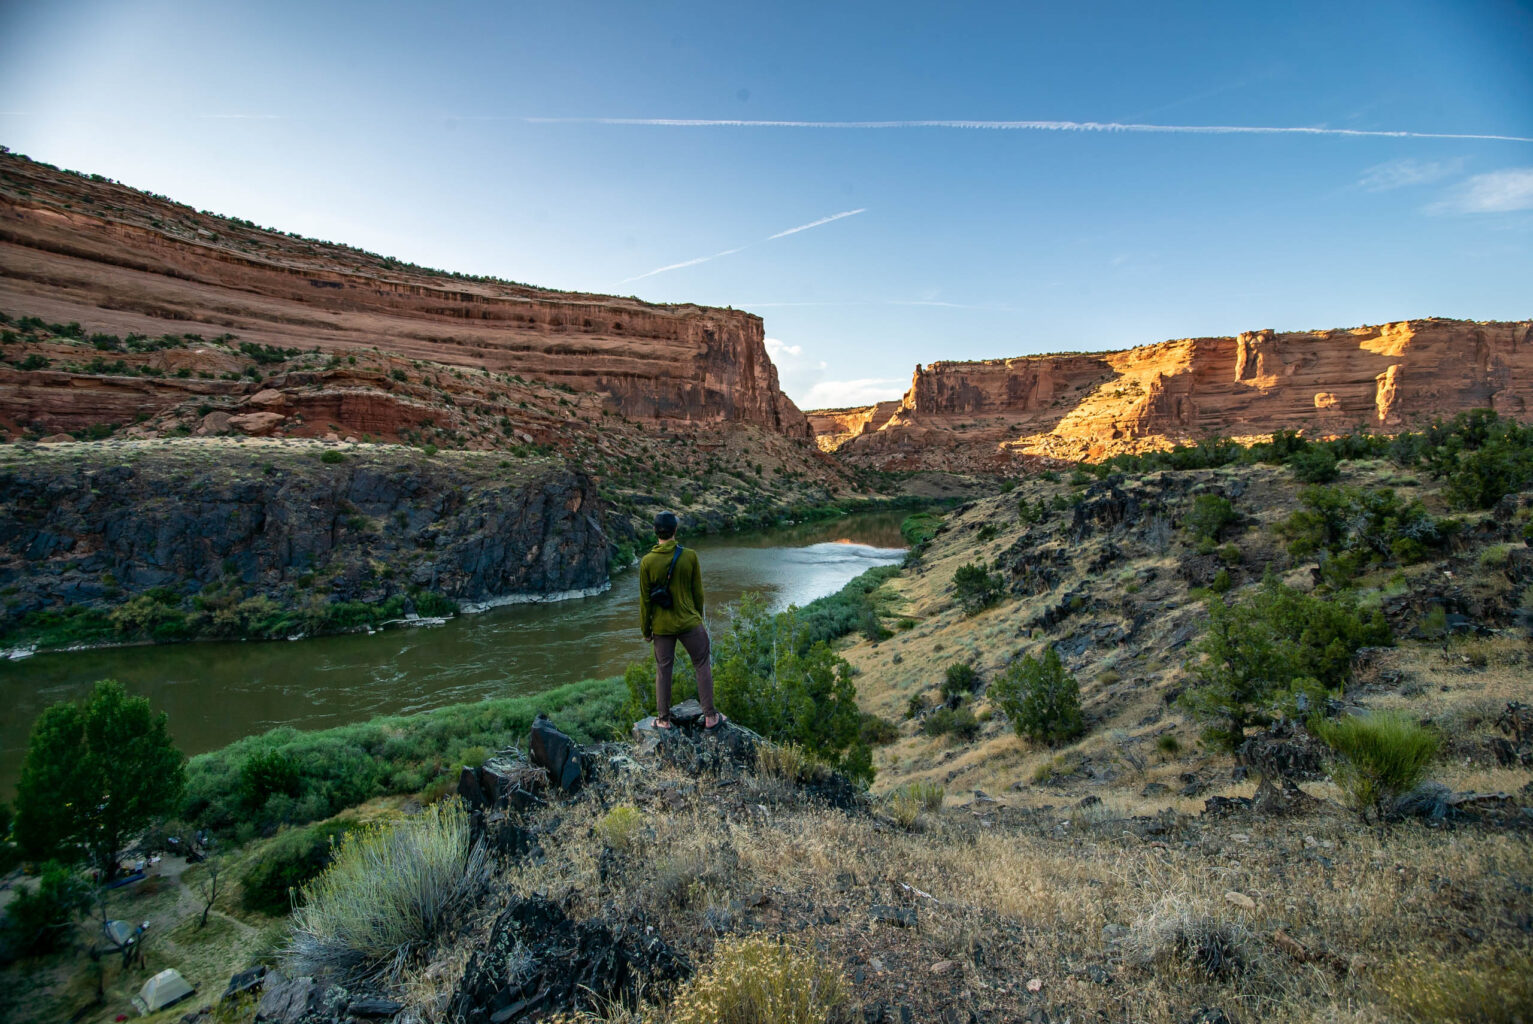 Person overlooking the river at Canyonlands.